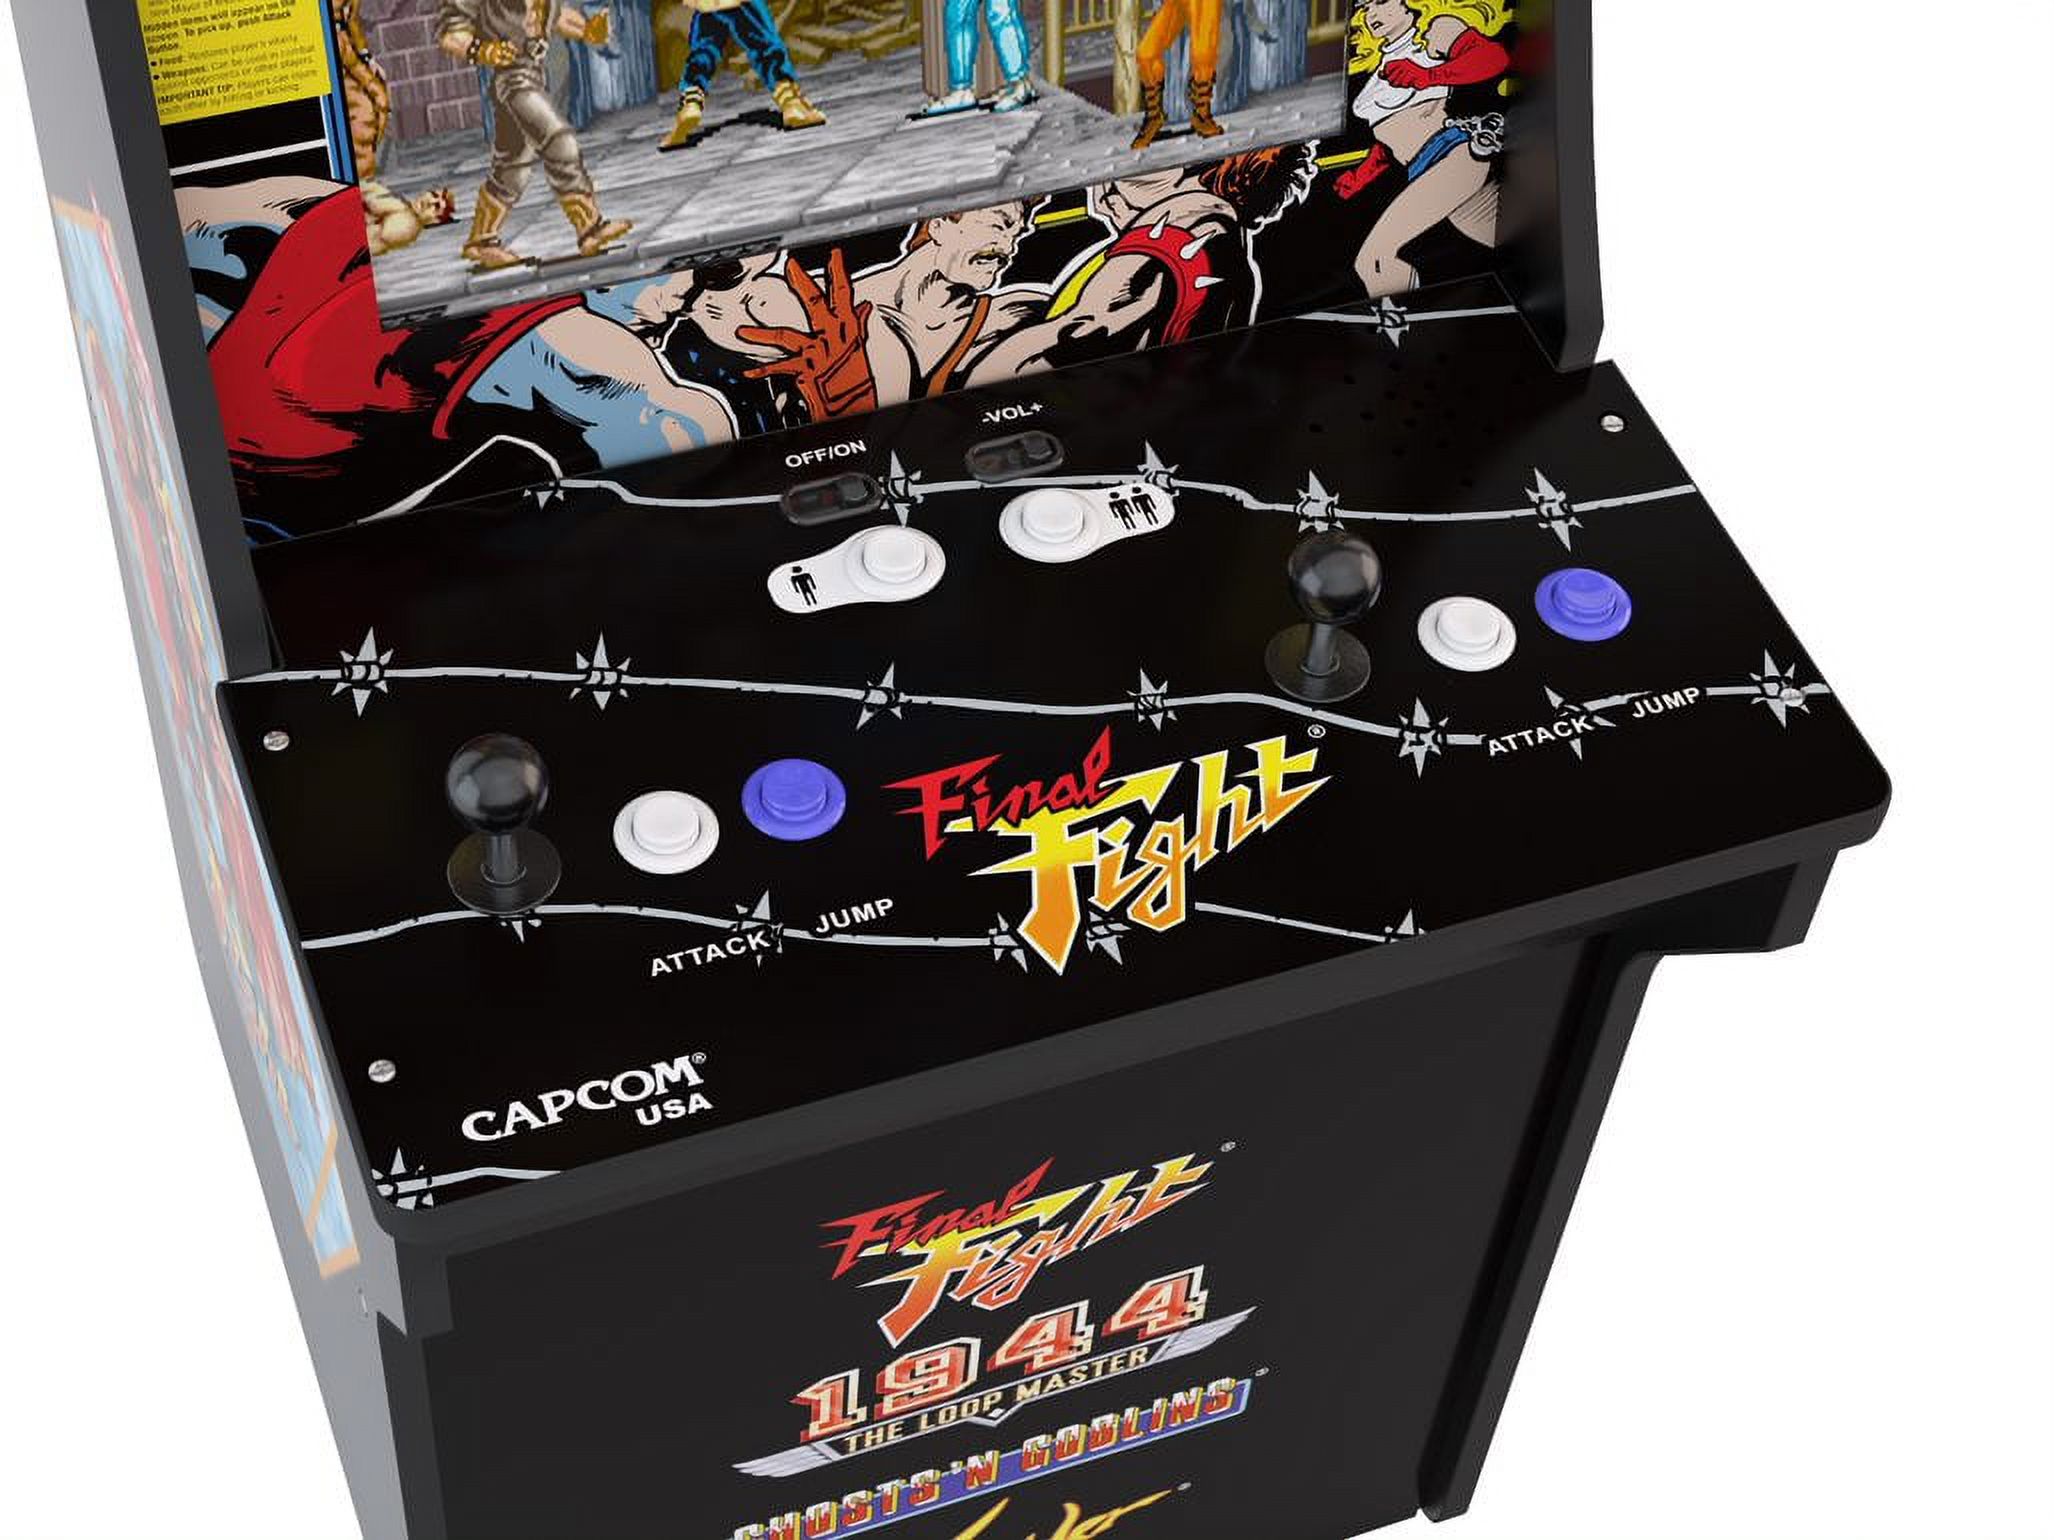 Arcade1Up, Final Fight Arcade Machine without riser - image 5 of 5